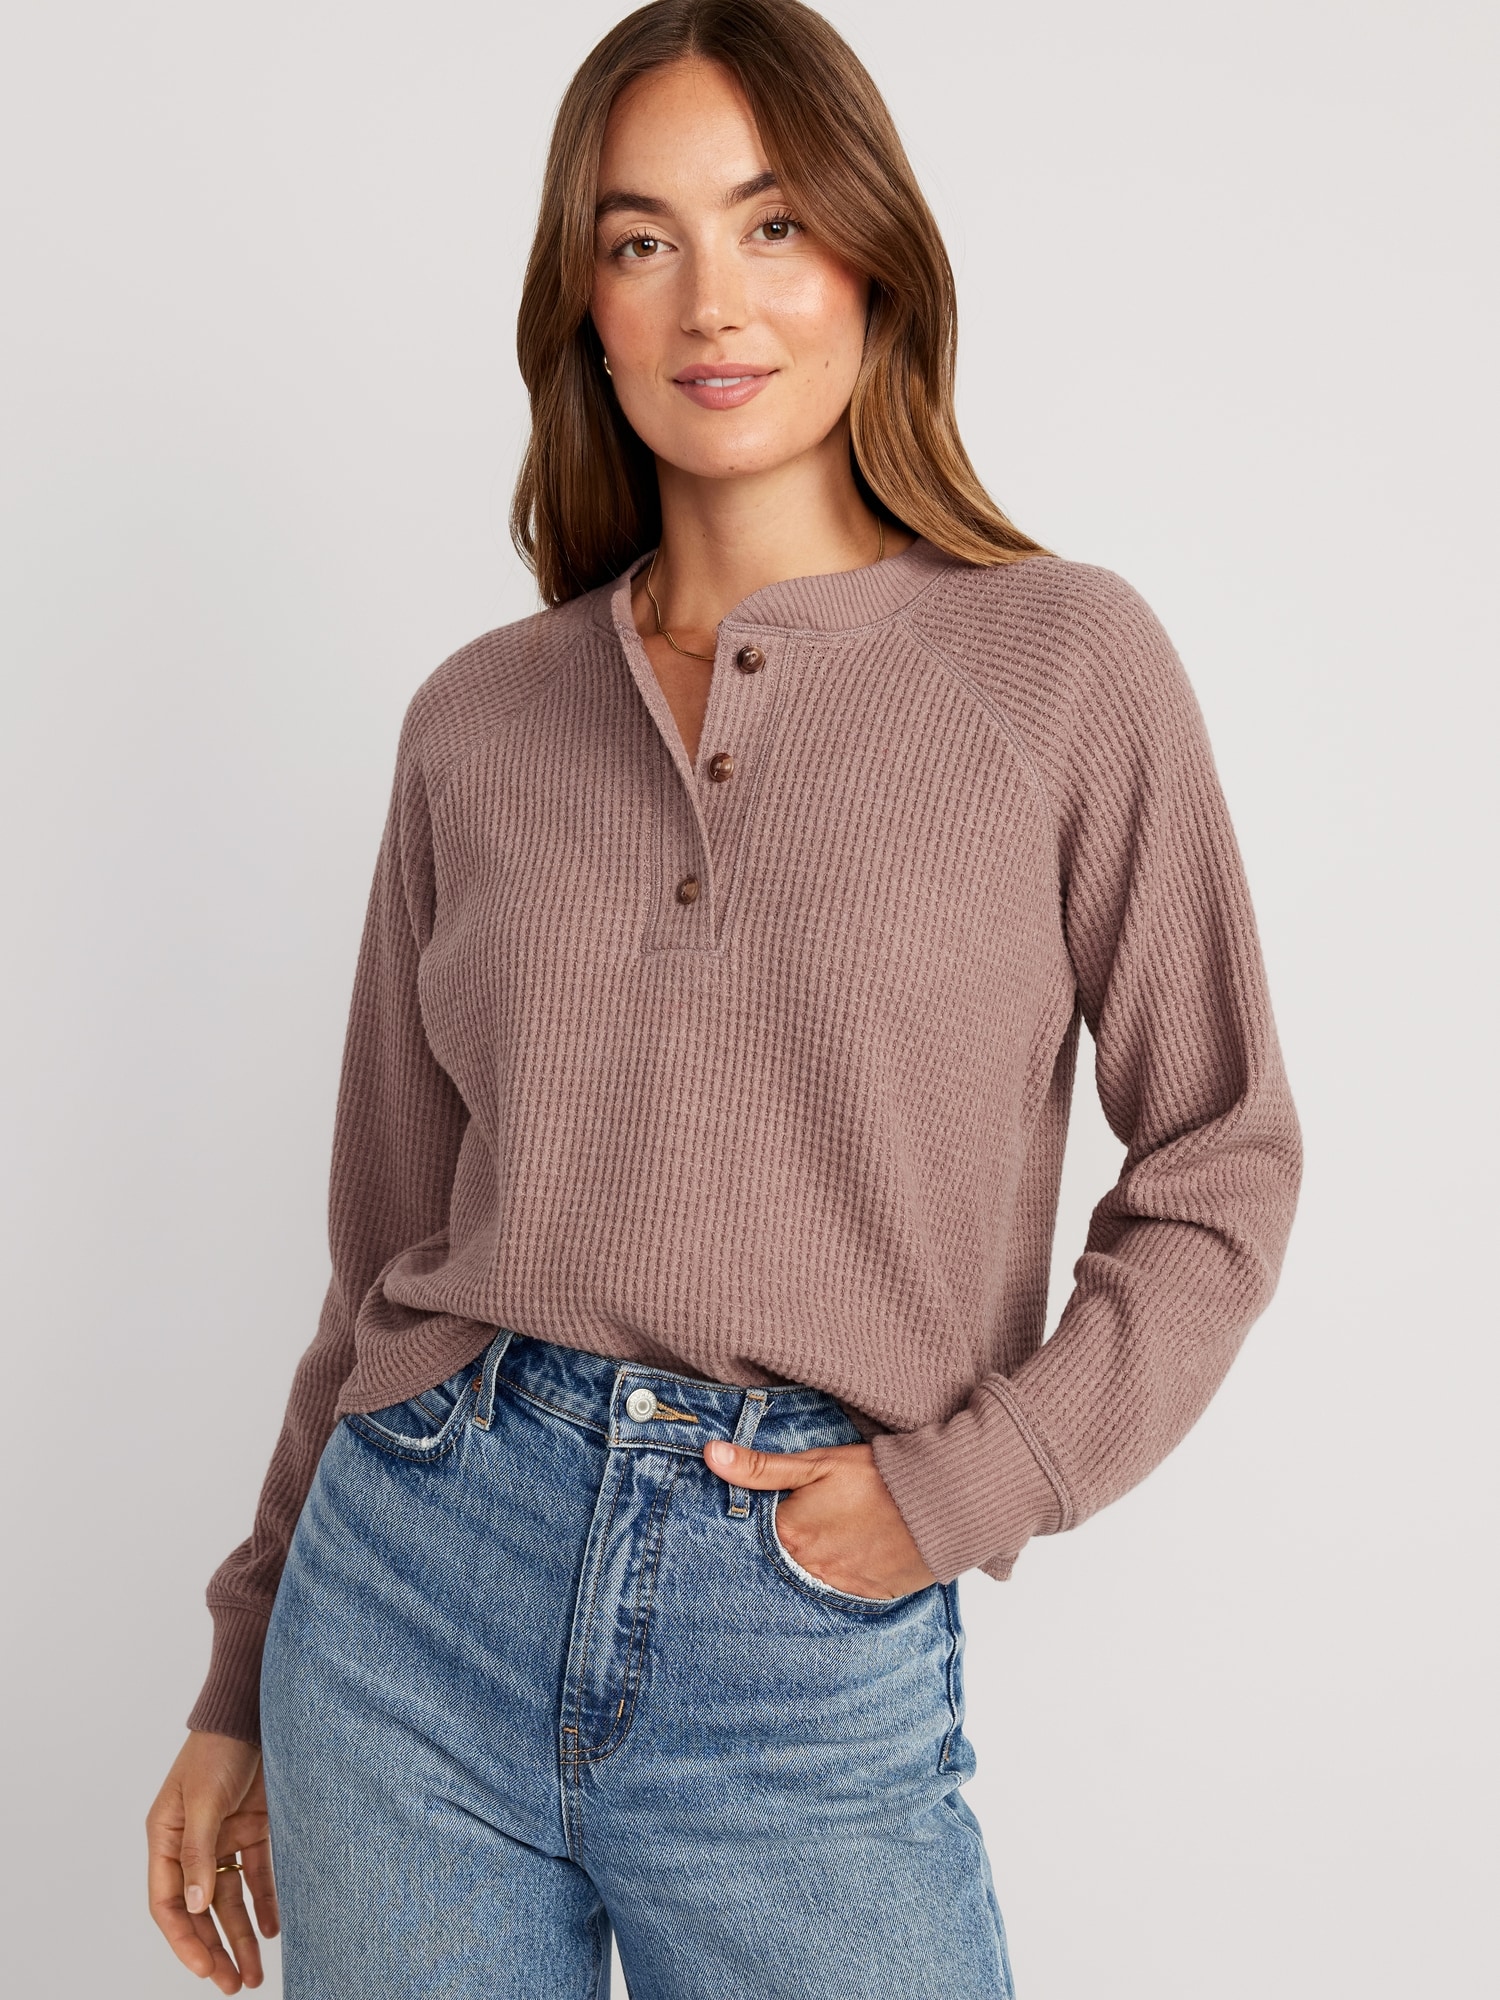 Cropped Henley Tops